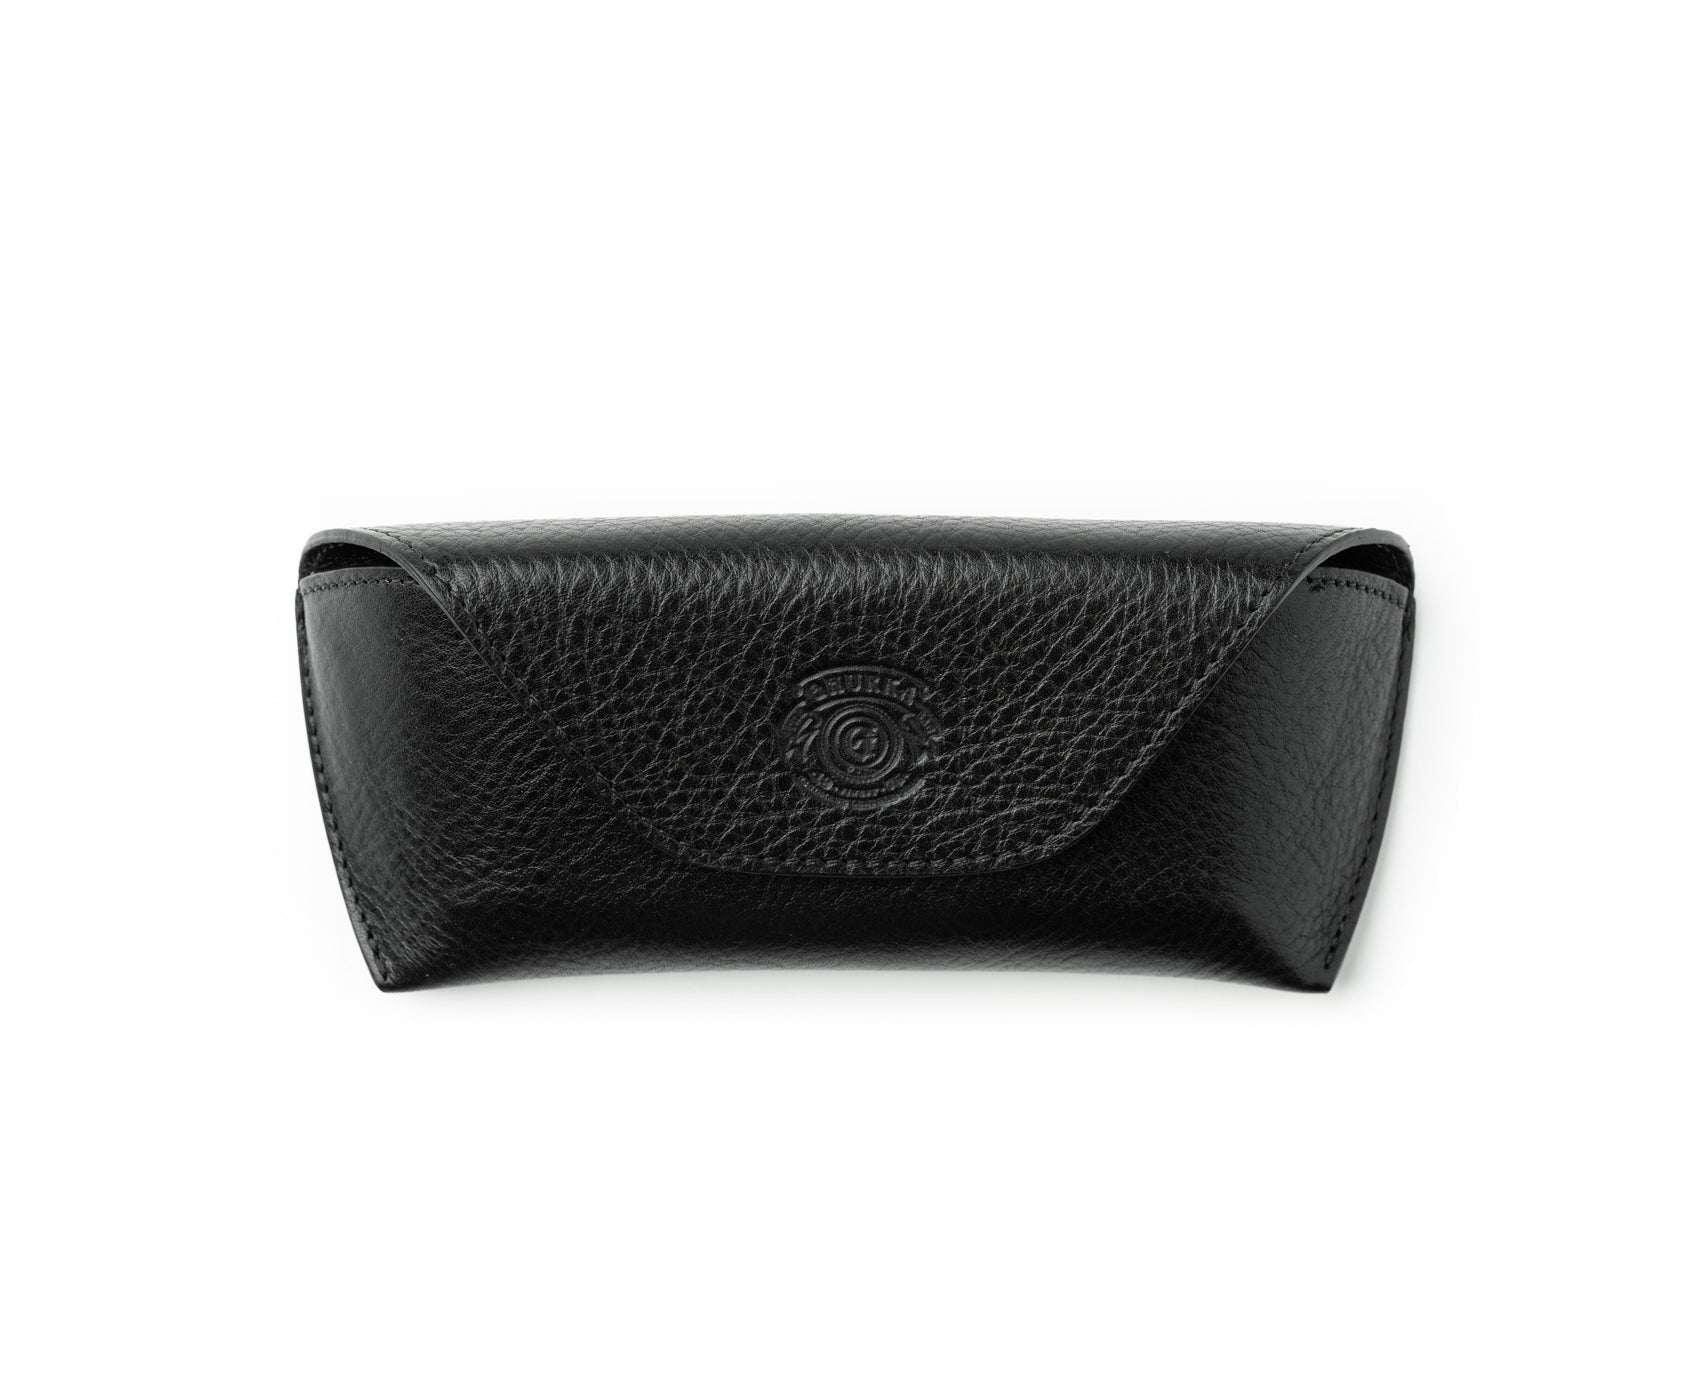 The Leather Sunglass Case – Clayton & Crume